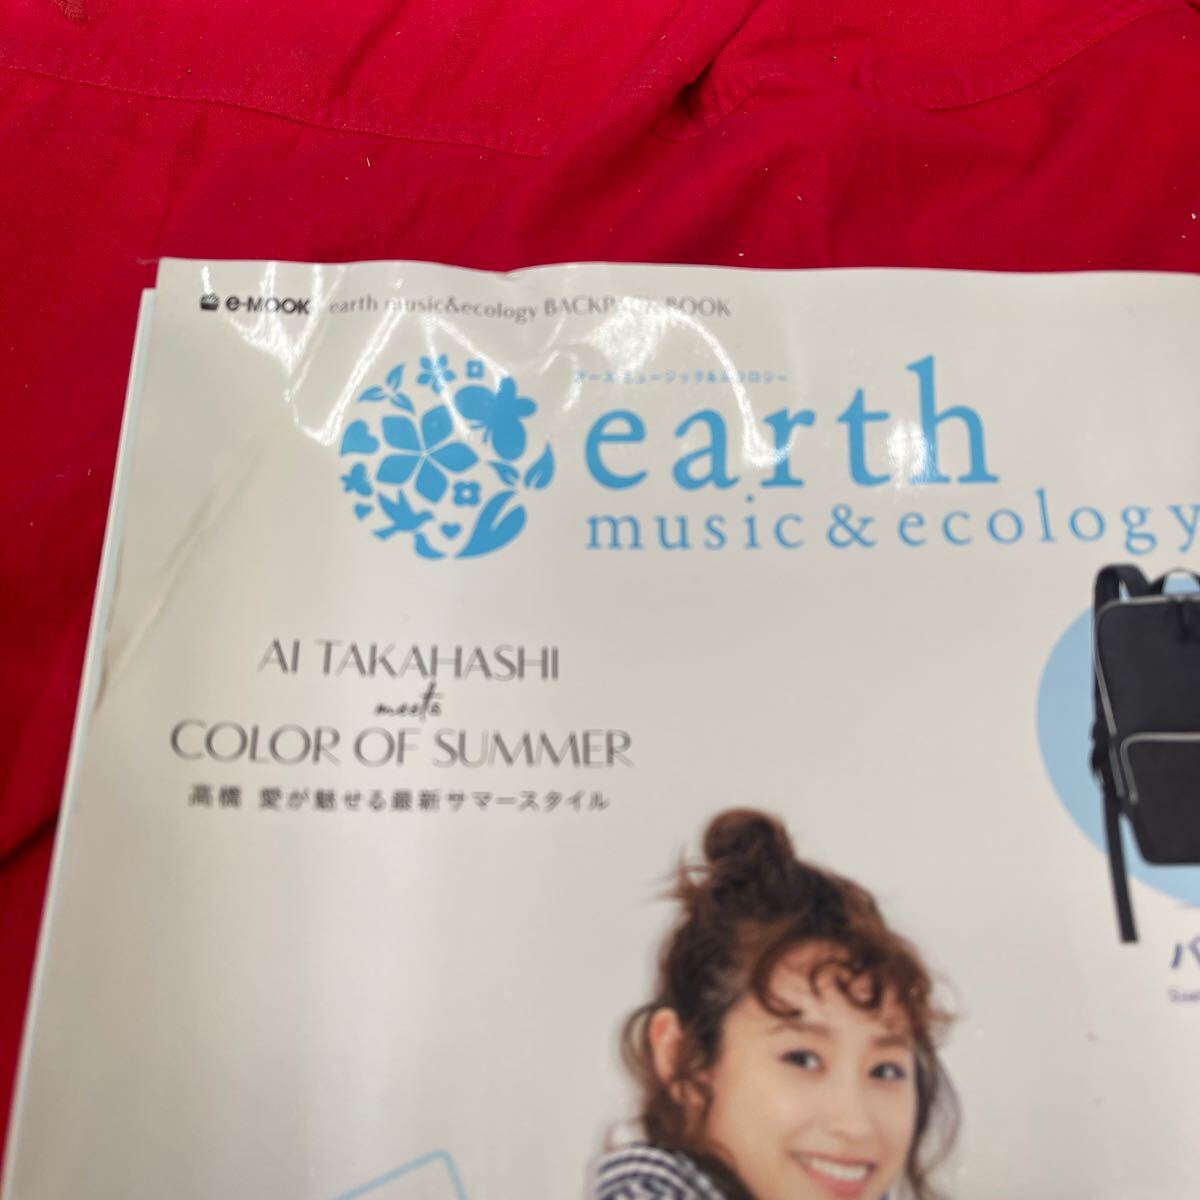 Y501. 32. earth music＆ecology BACKPACK BOOK （e-MOOK 宝島社ブランドムック）. 未開封　保管品　外箱　歪み　潰れあり_画像2